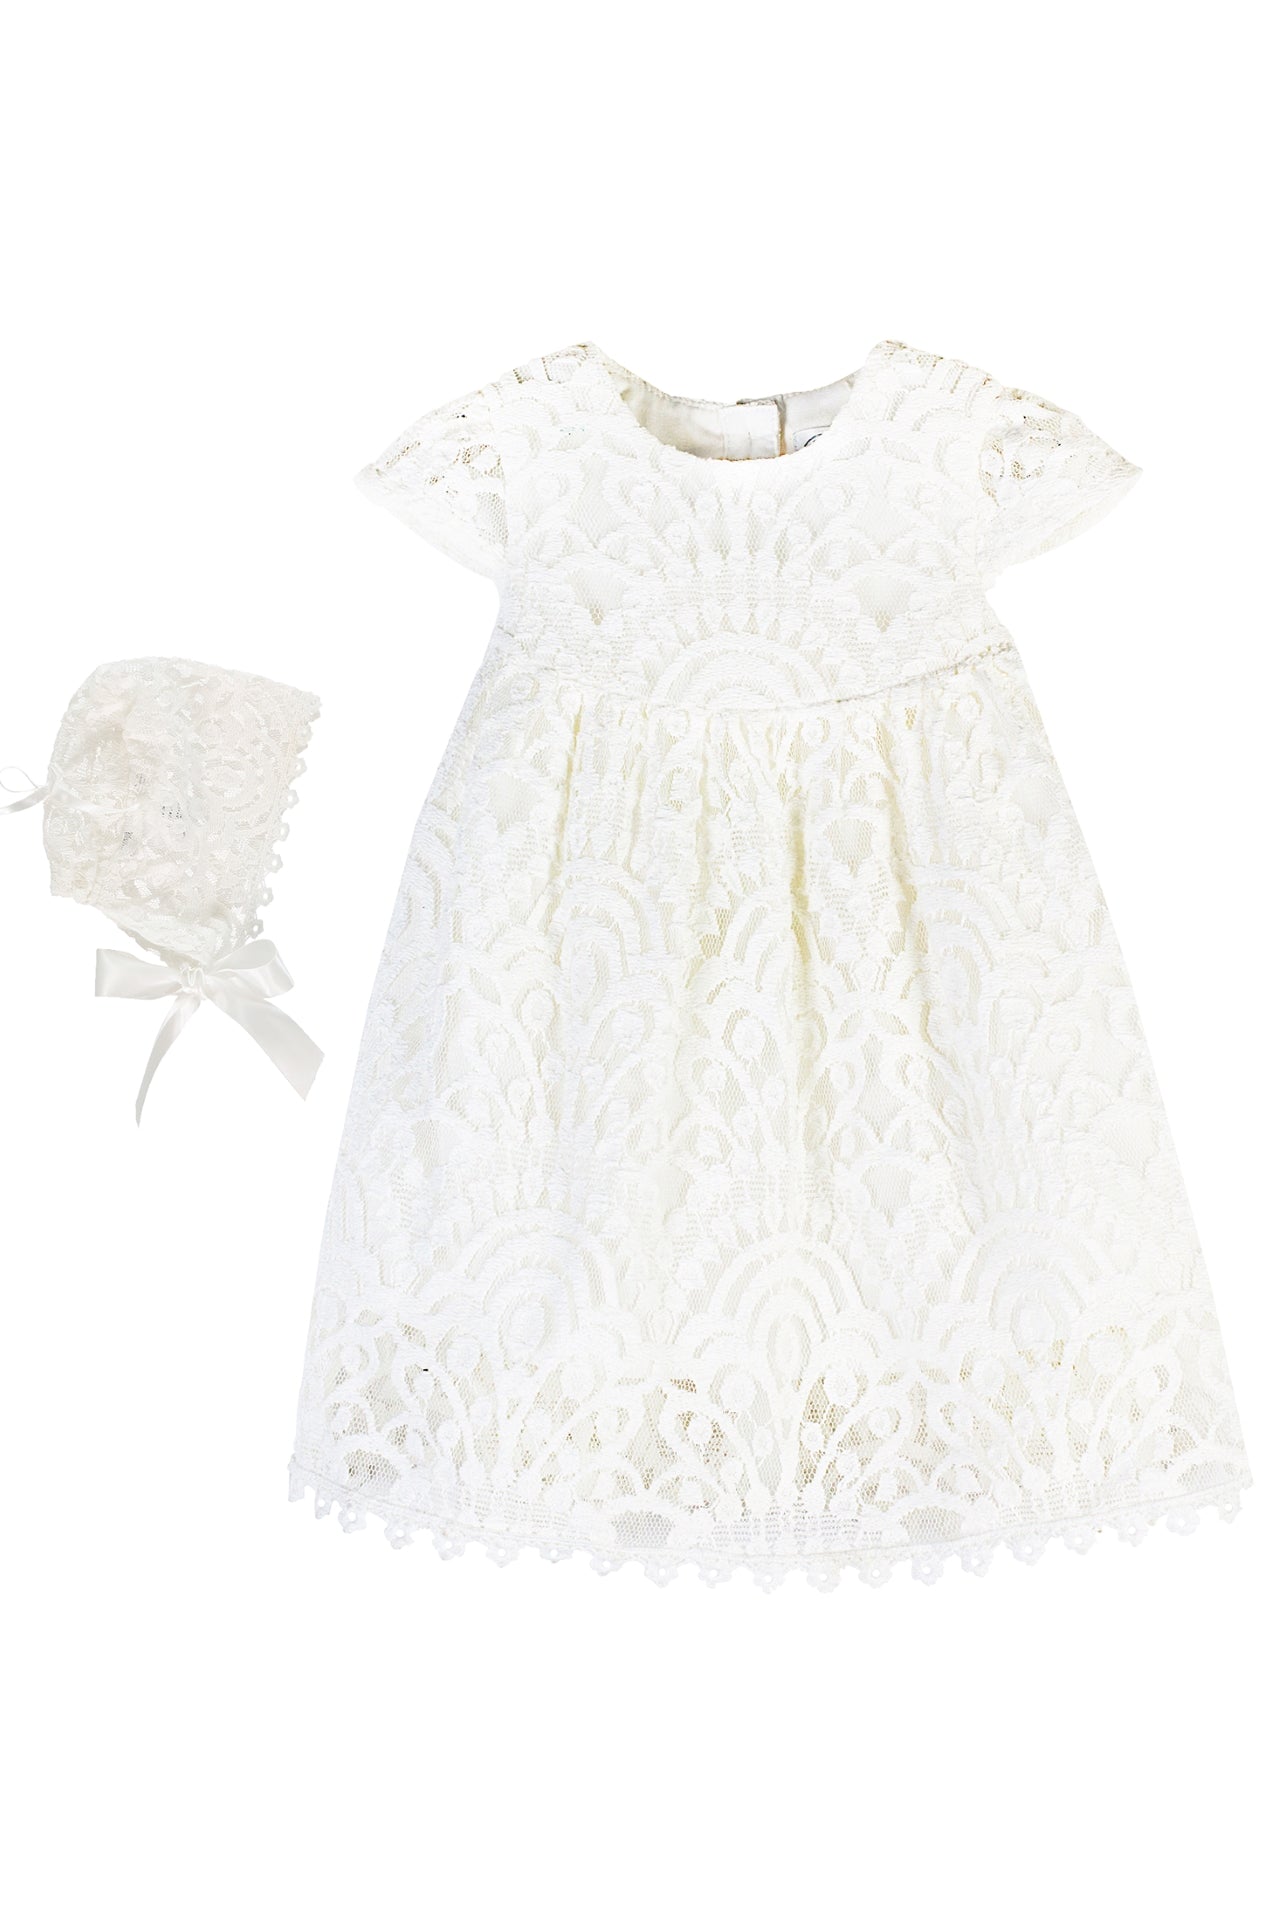 Wholesale Baby Girl Christening Lace Dress with Matching Bonnet - Imagewear